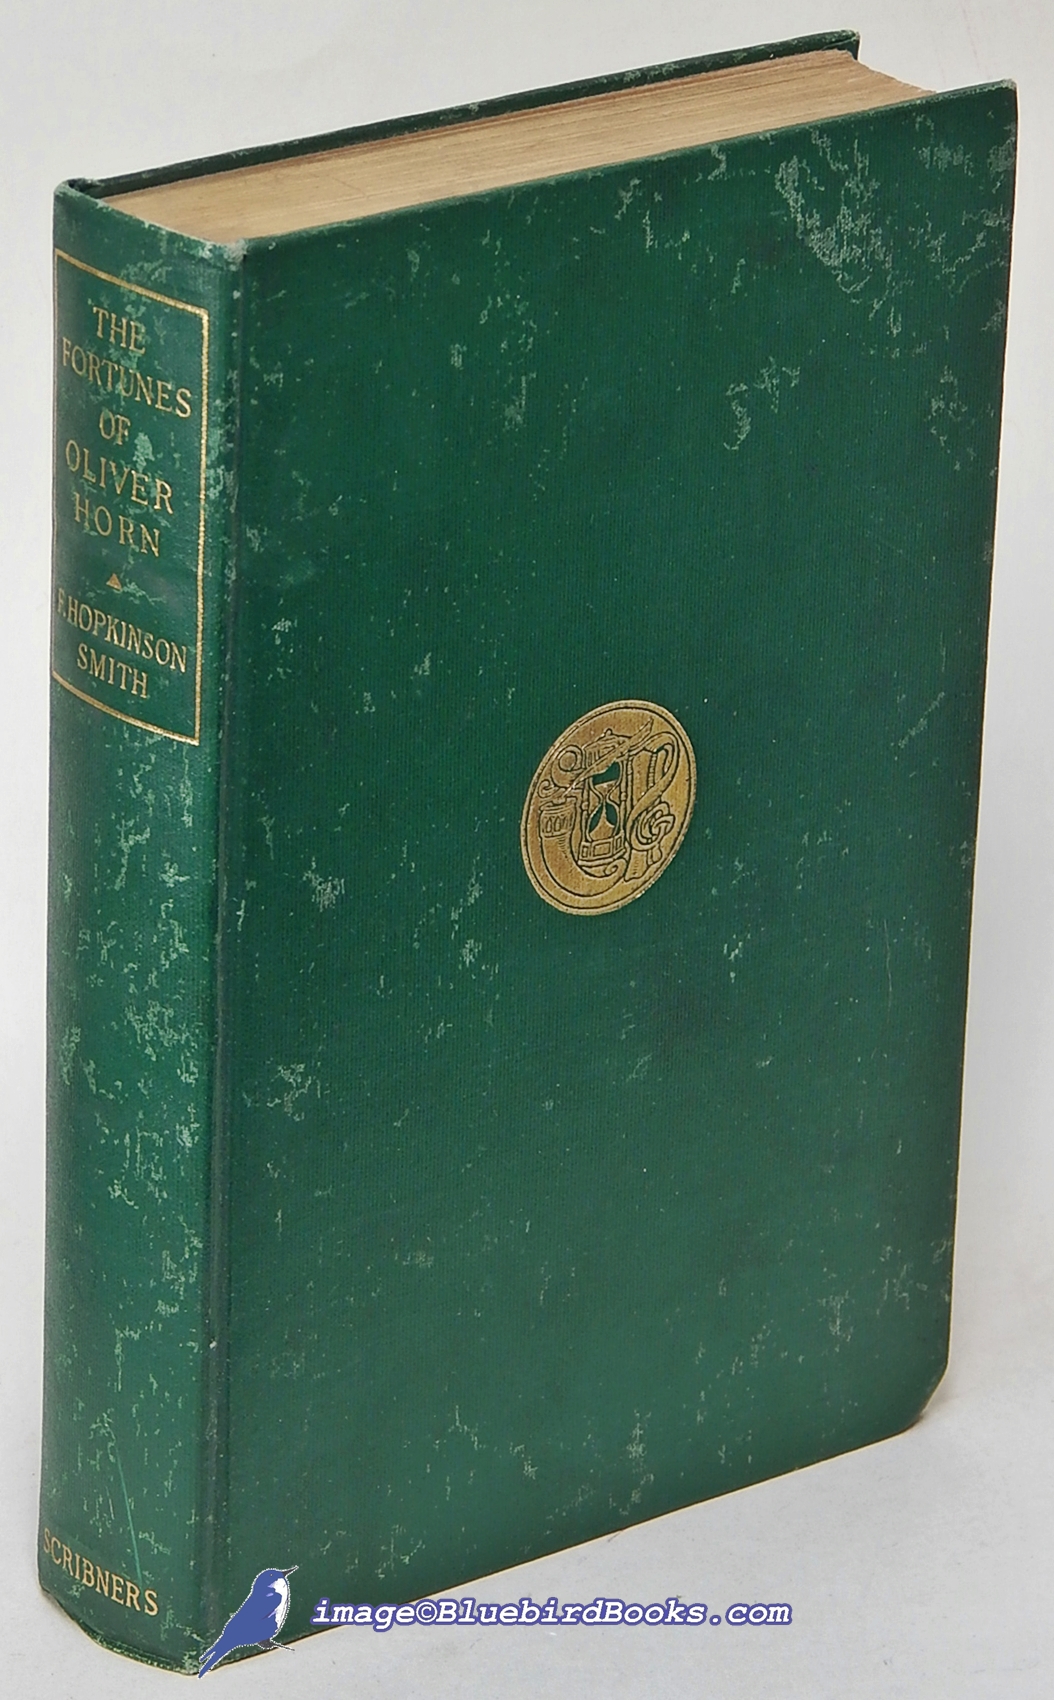 SMITH, F. HOPKINSON - The Fortunes of Oliver Horn